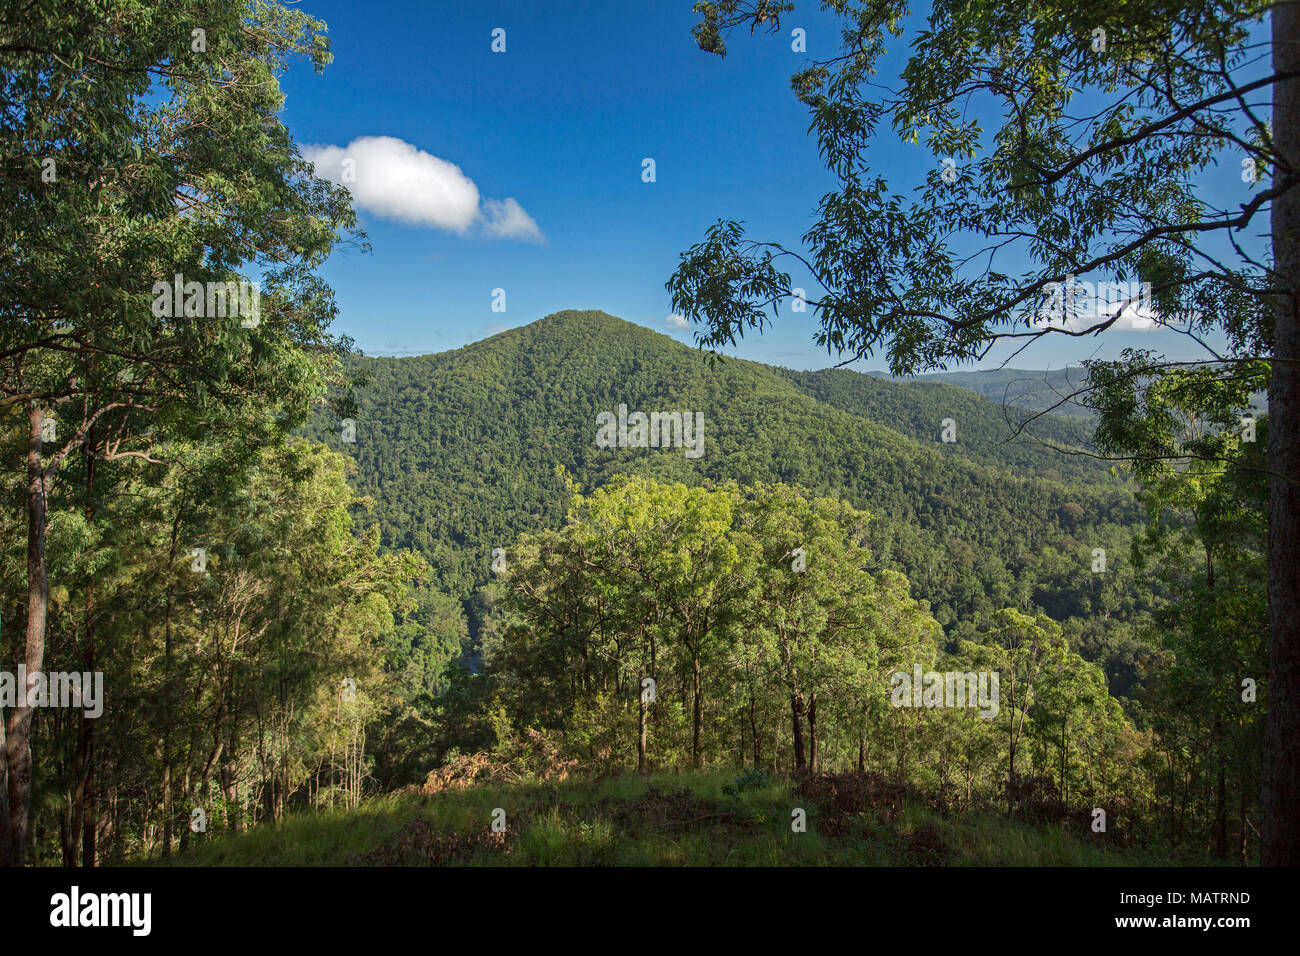 View of landscape of forested hills of Conondale Ranges National Park under blue sky in Queensland Australia Stock Photo